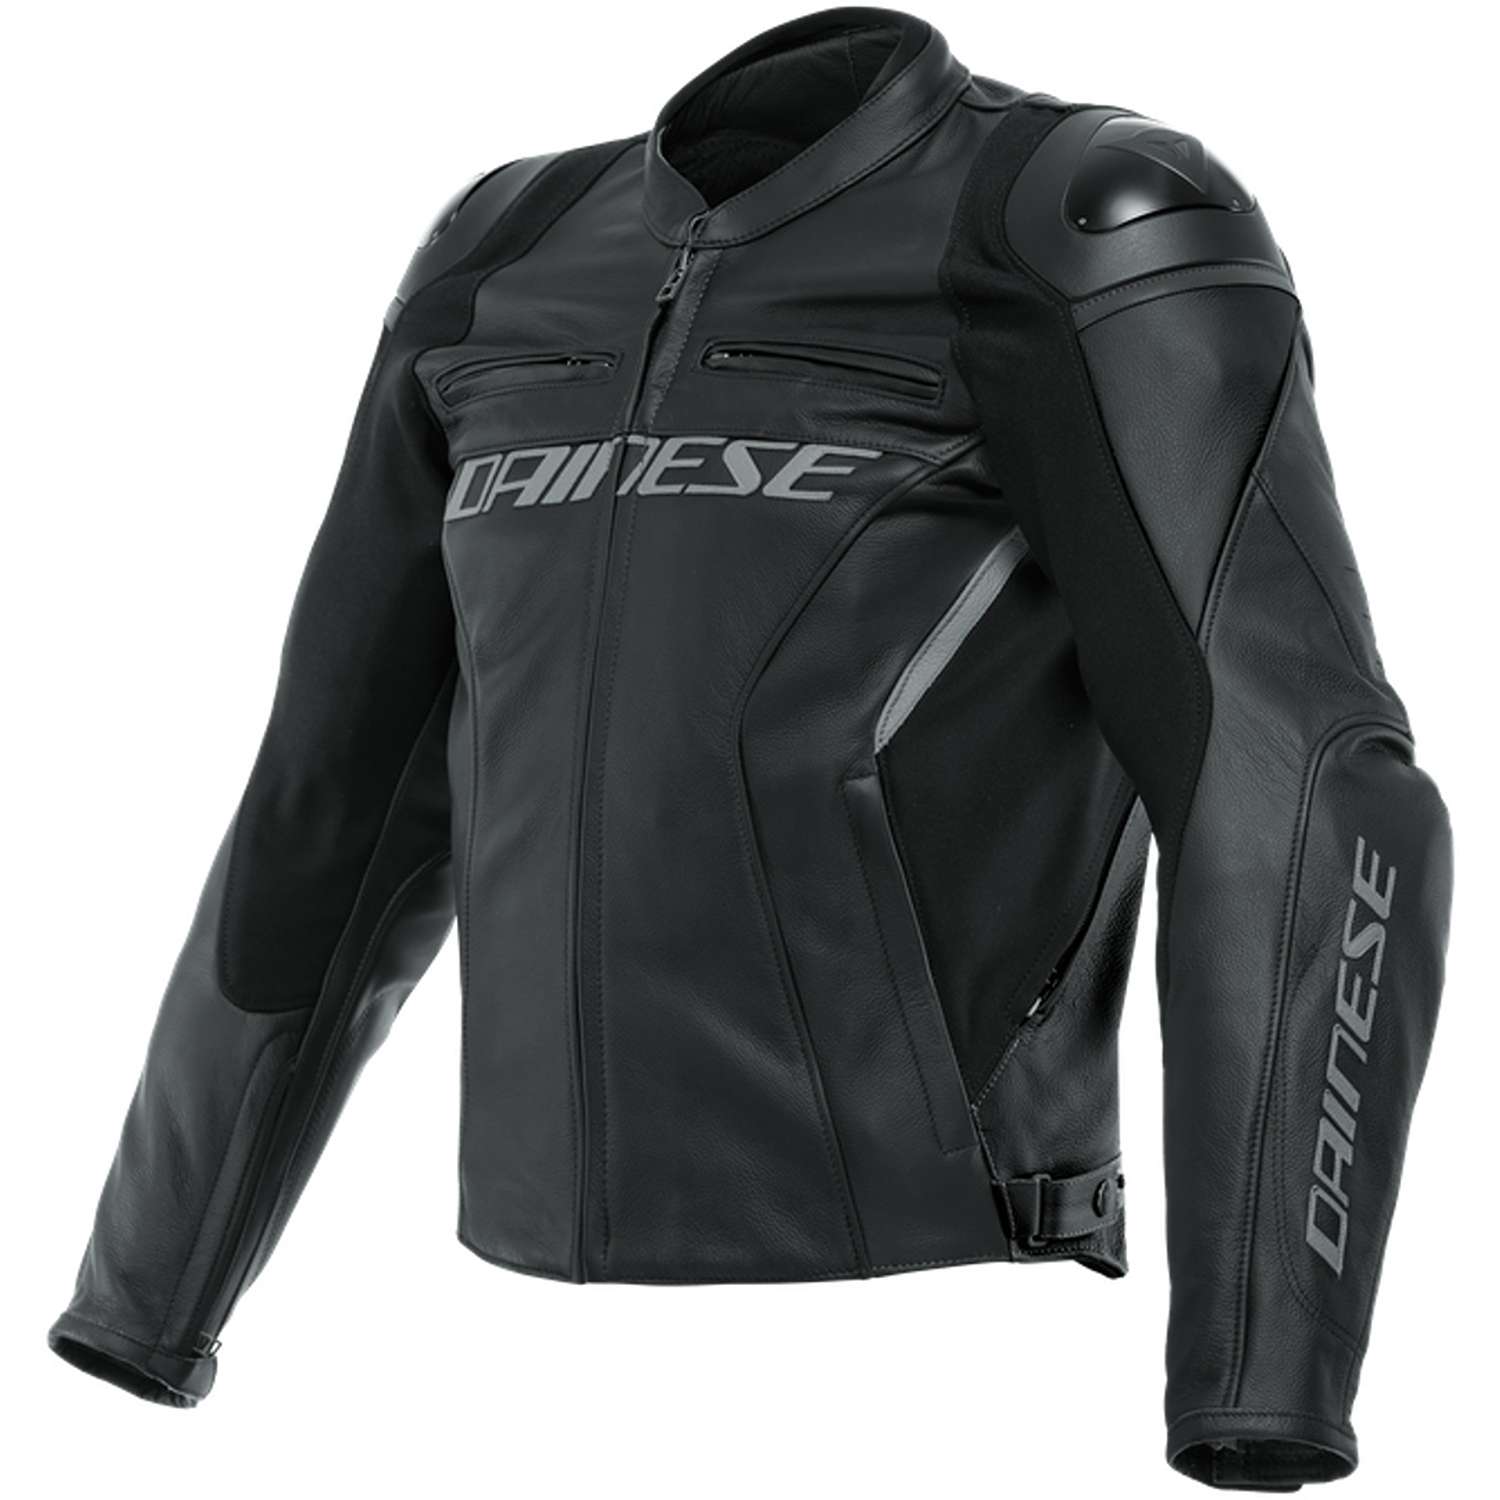 Image of EU Dainese Racing 4 Leather Jacket S/T Black Black Taille 28